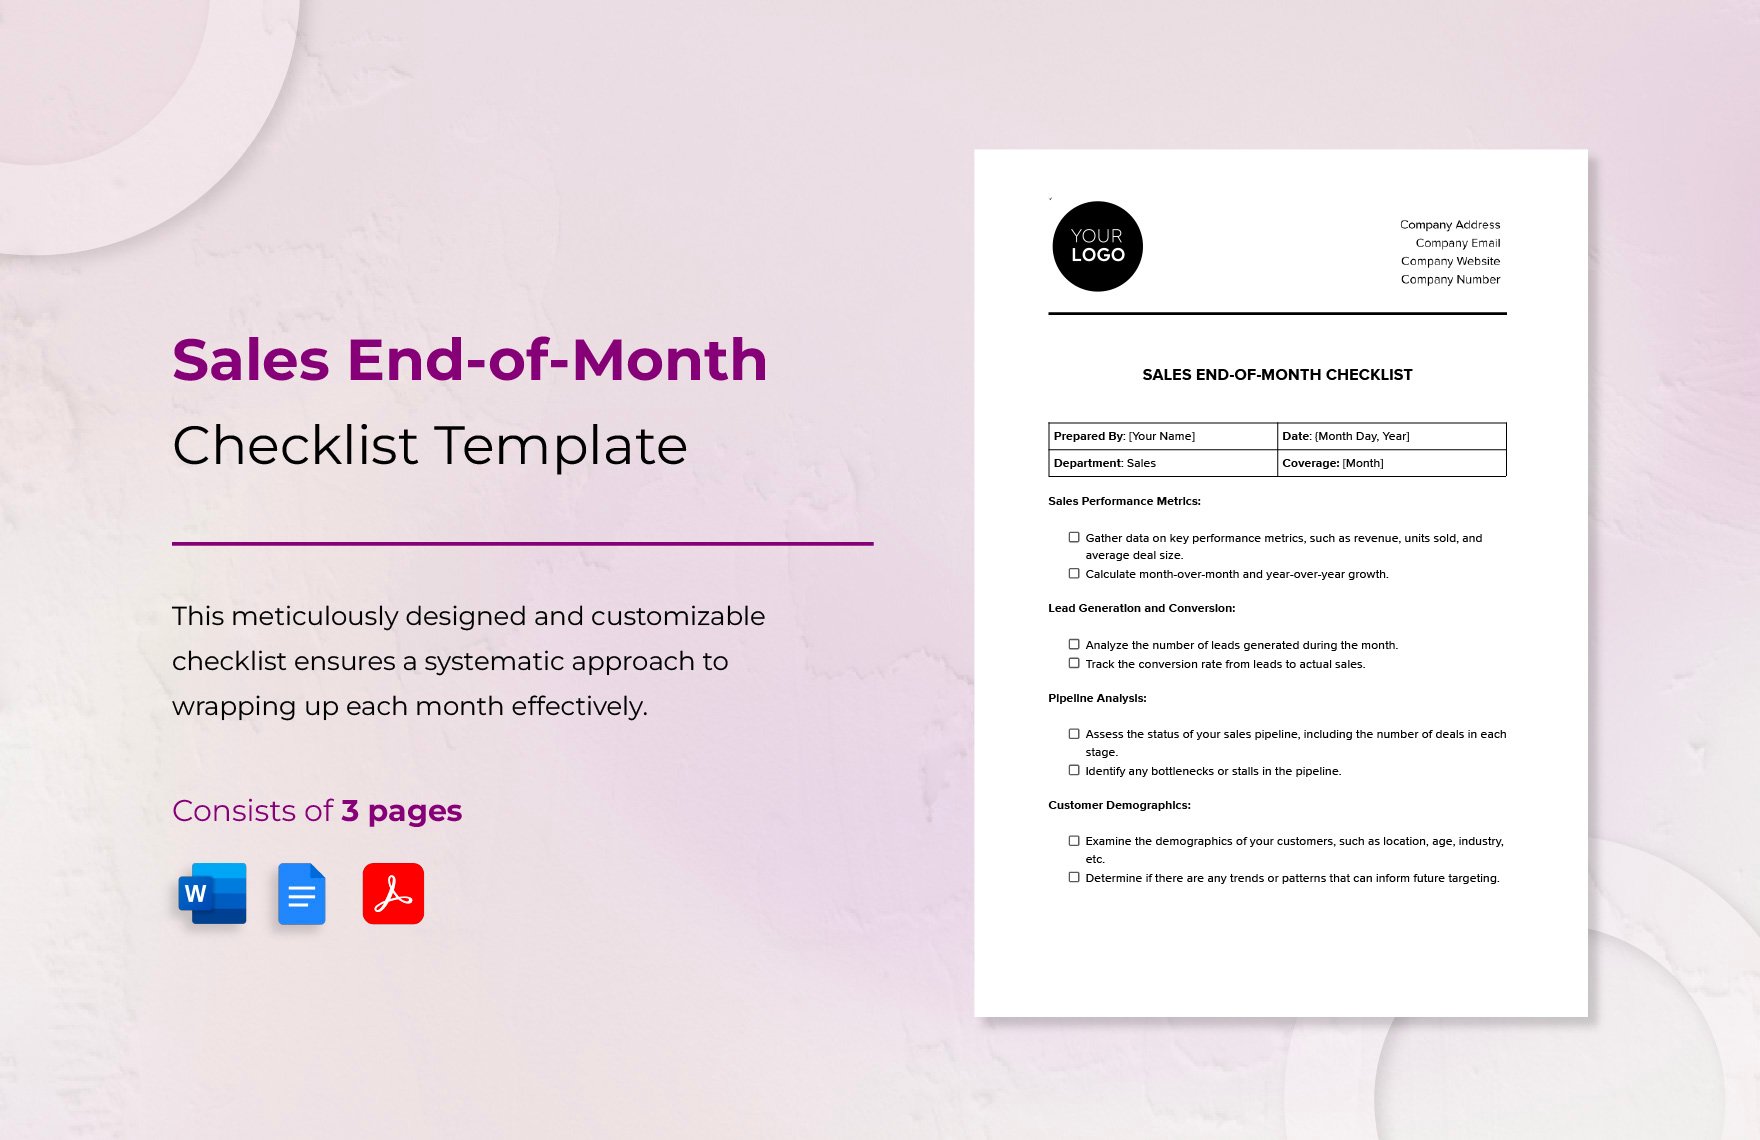 Sales End-of-Month Checklist Template in Word, Google Docs, PDF